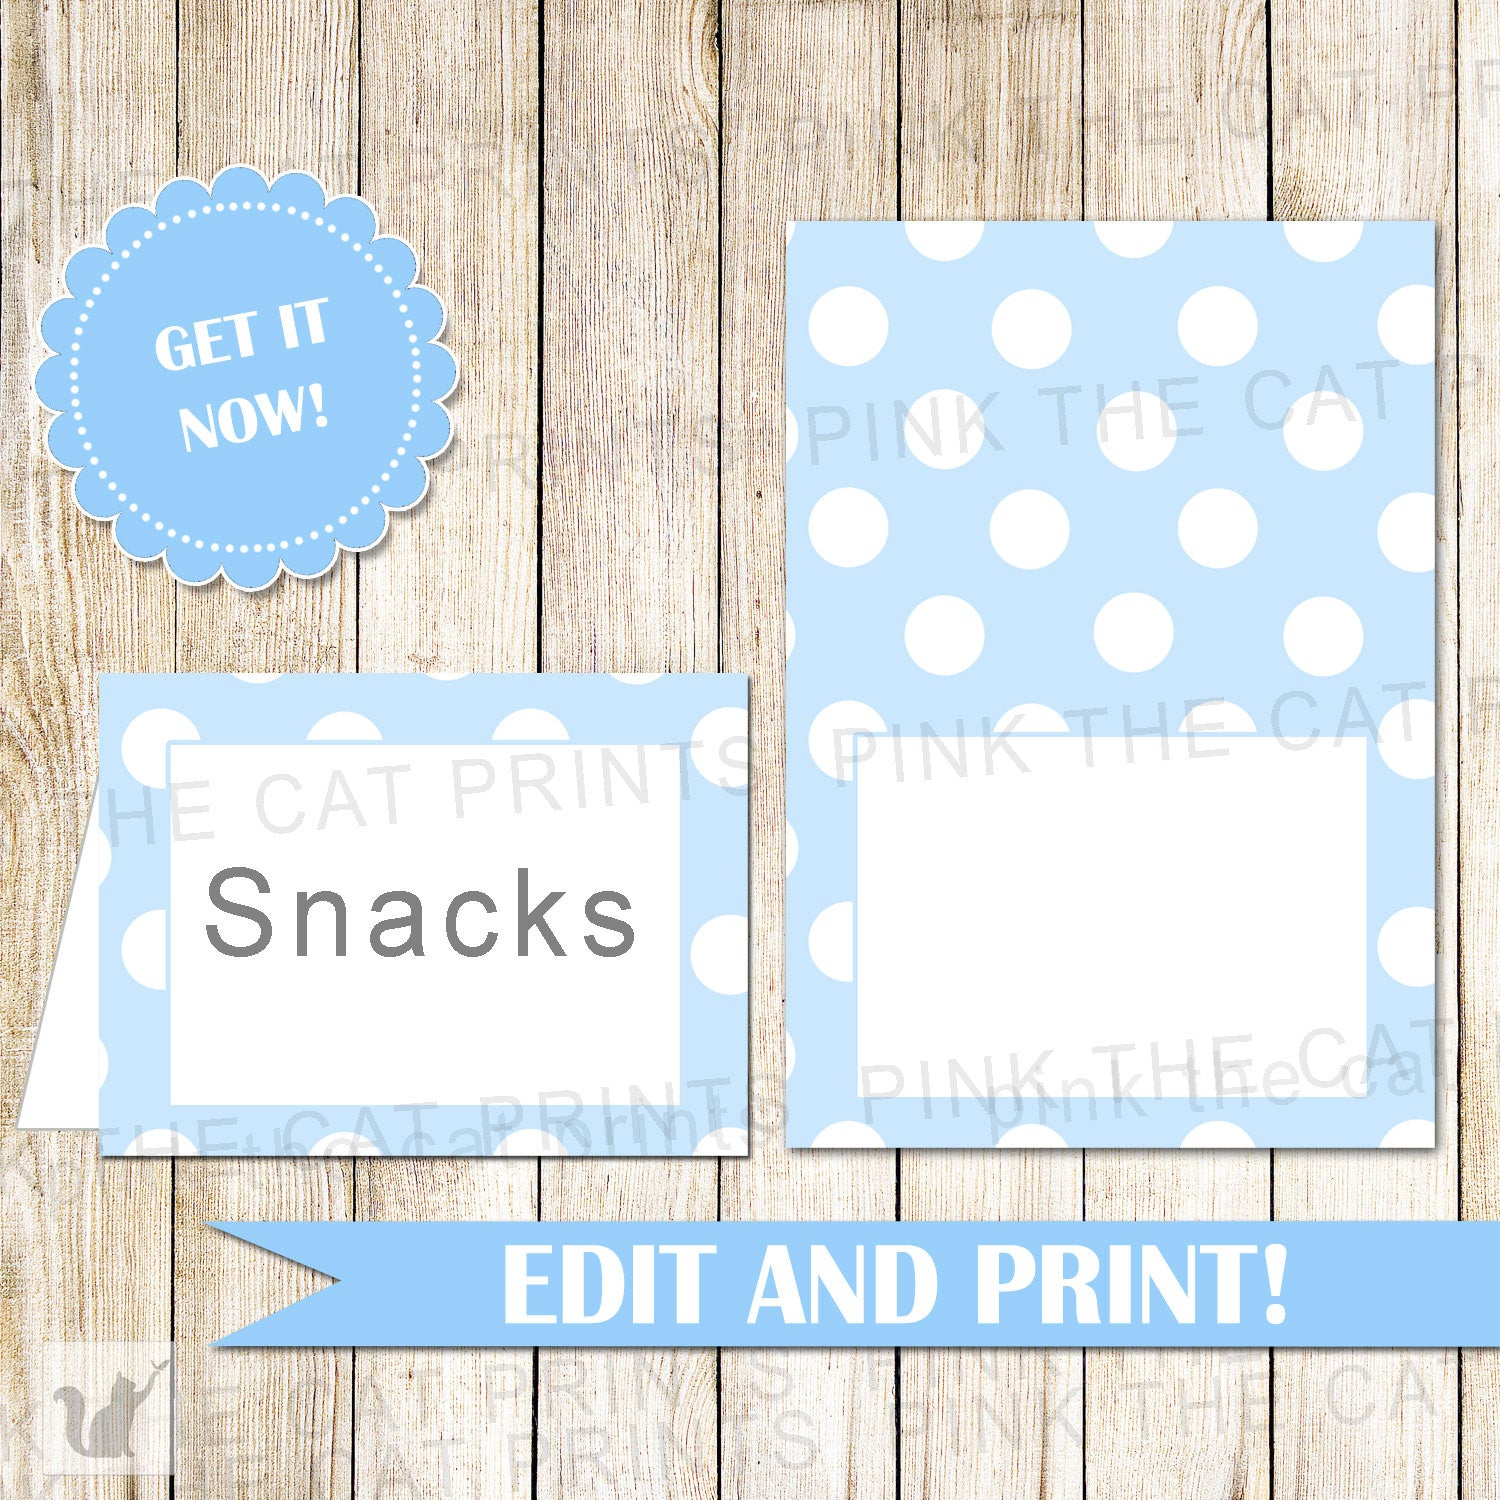 Buffet Food Label Wedding Place Seating Name Card Blue White Polka Dots